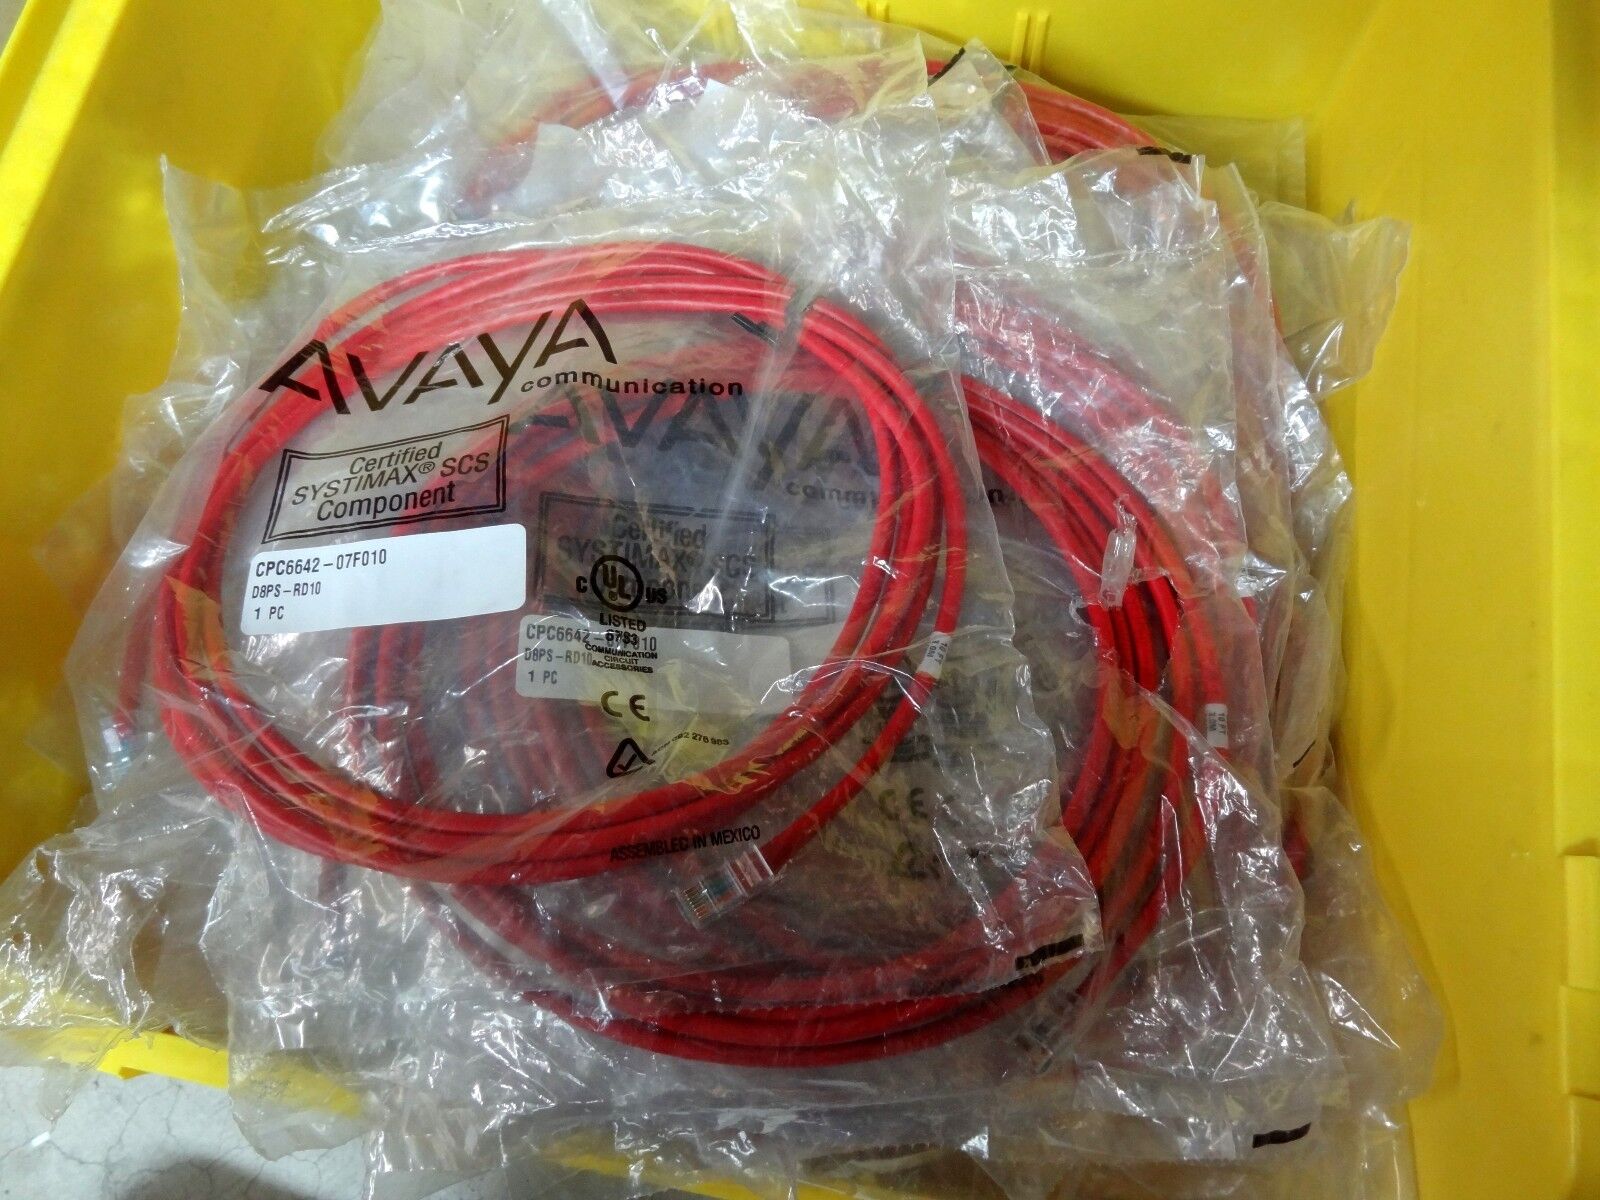 LOT OF 14 RED ASSORTED SIZED AVAYA ETHERNET CABLES 7FT, 10FT, & 19FT [BRAND NEW]